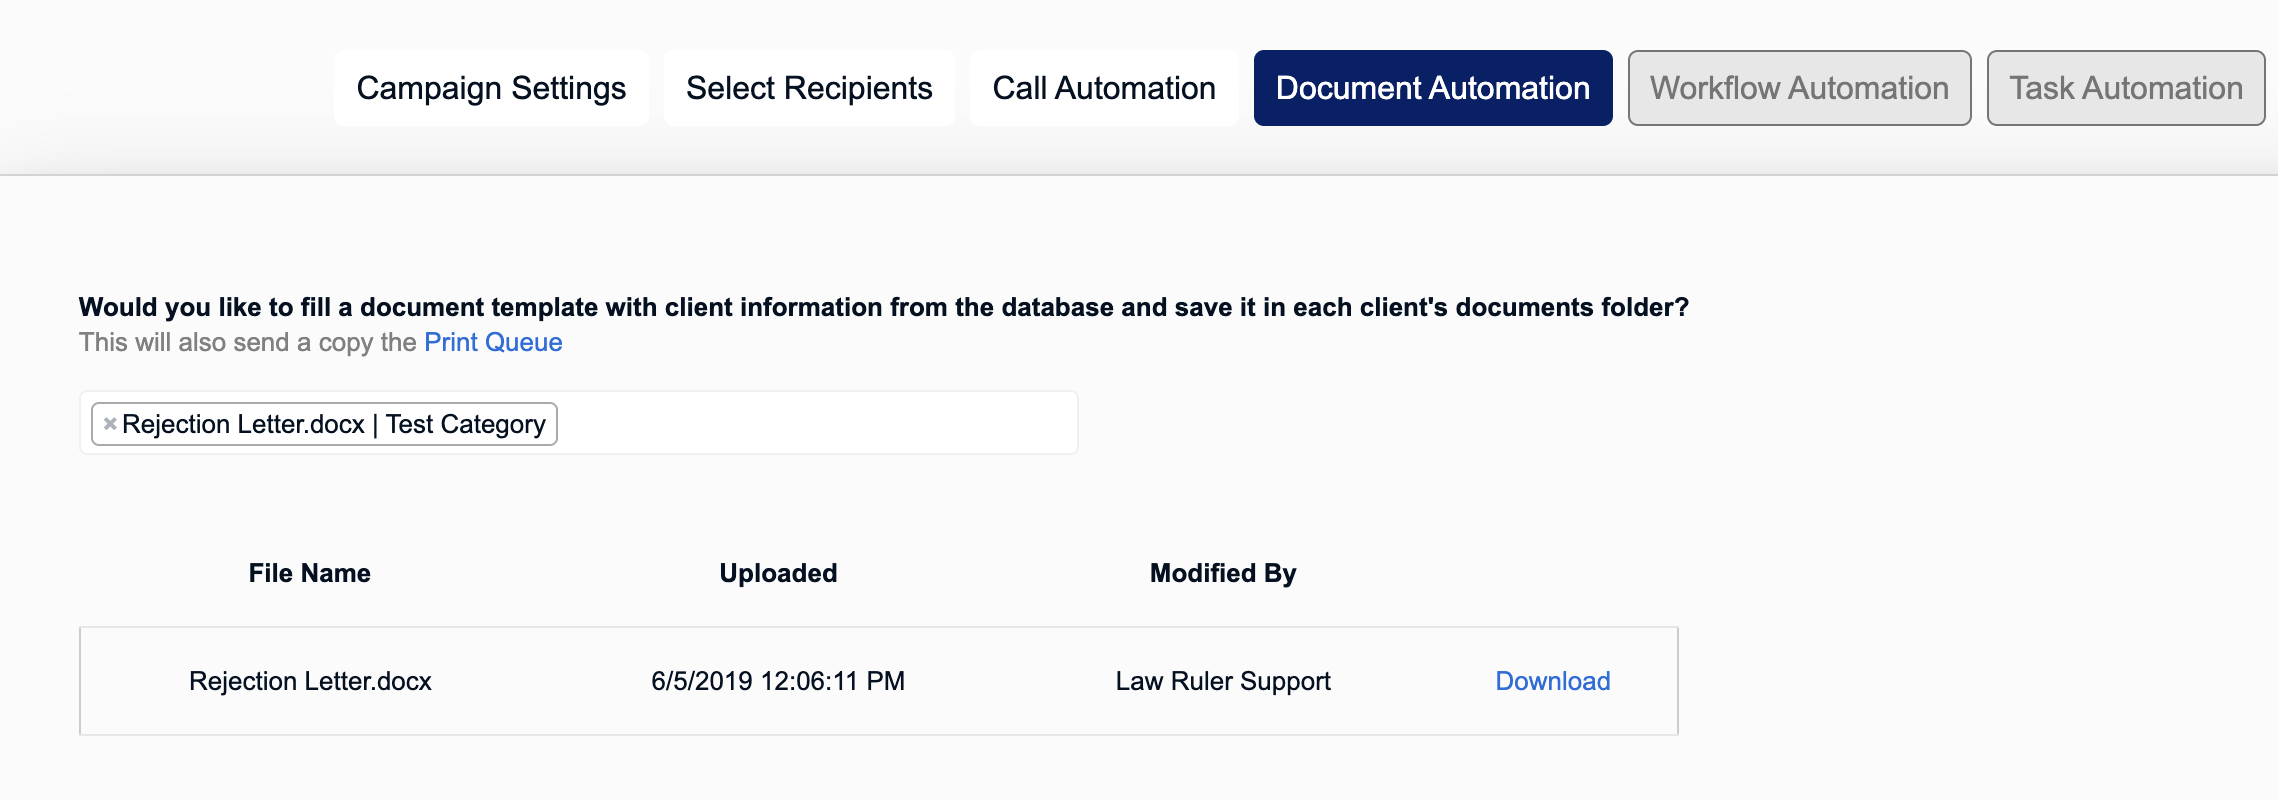 document_automation_screen.png